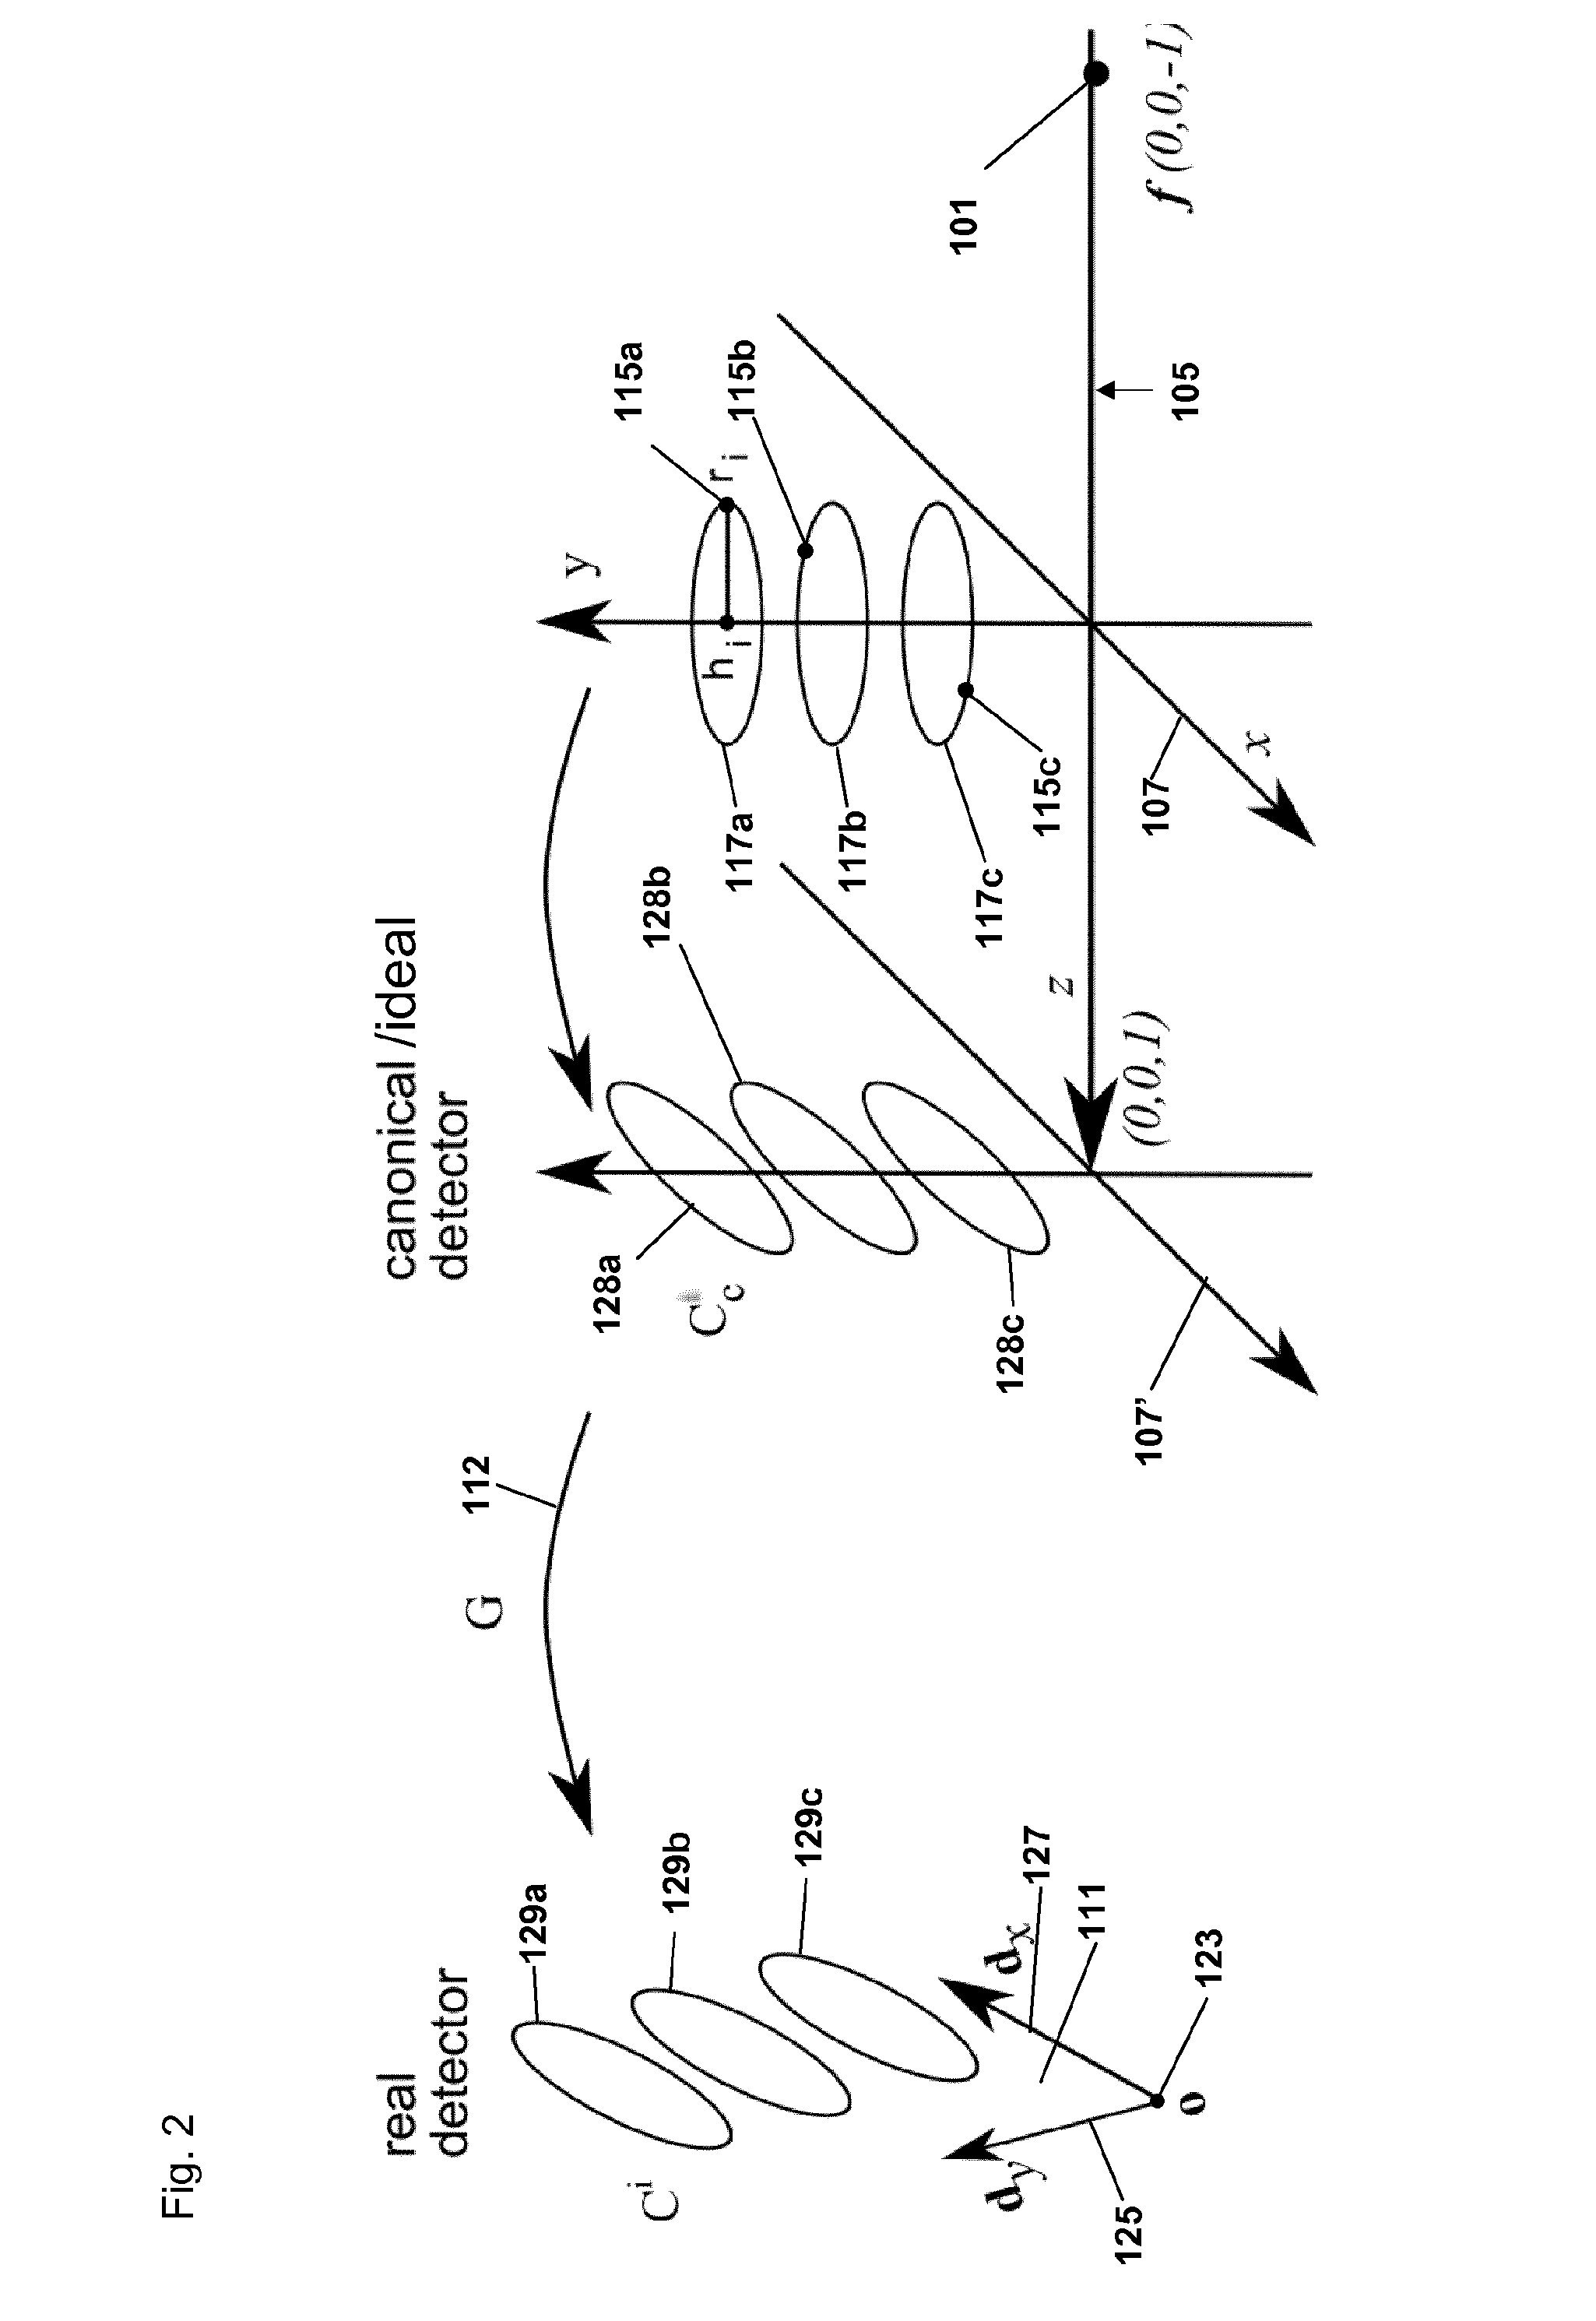 Geometric Characterization and Calibration of a Cone-Beam Computer Tomography Apparatus